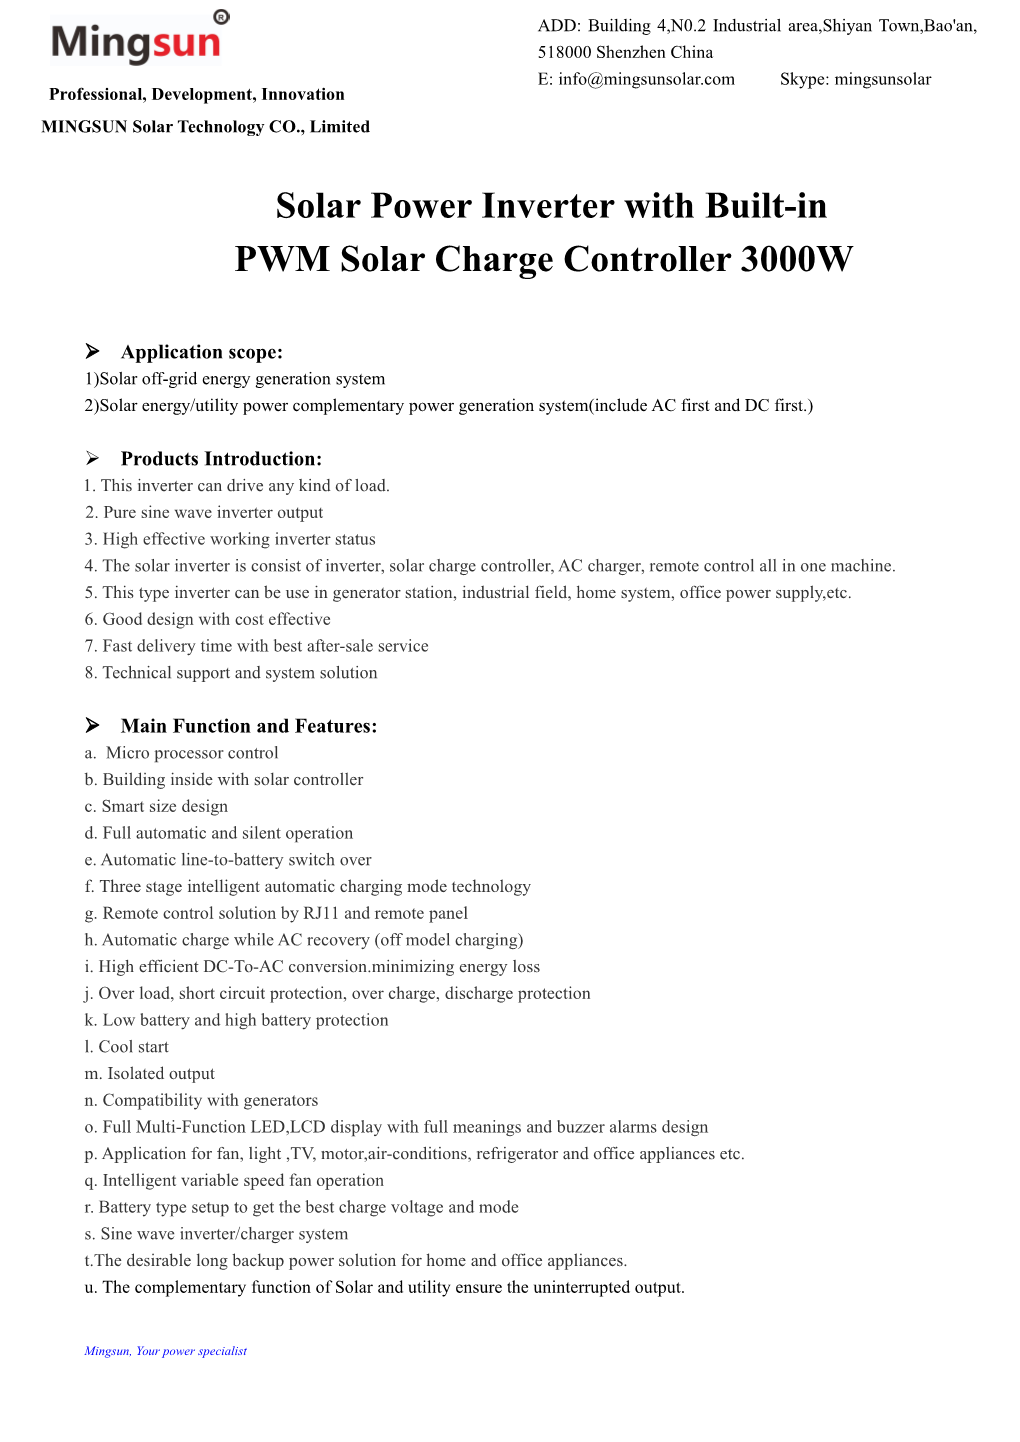 Solar Power Inverter with Built-In PWM Solar Charge Controller 3000W